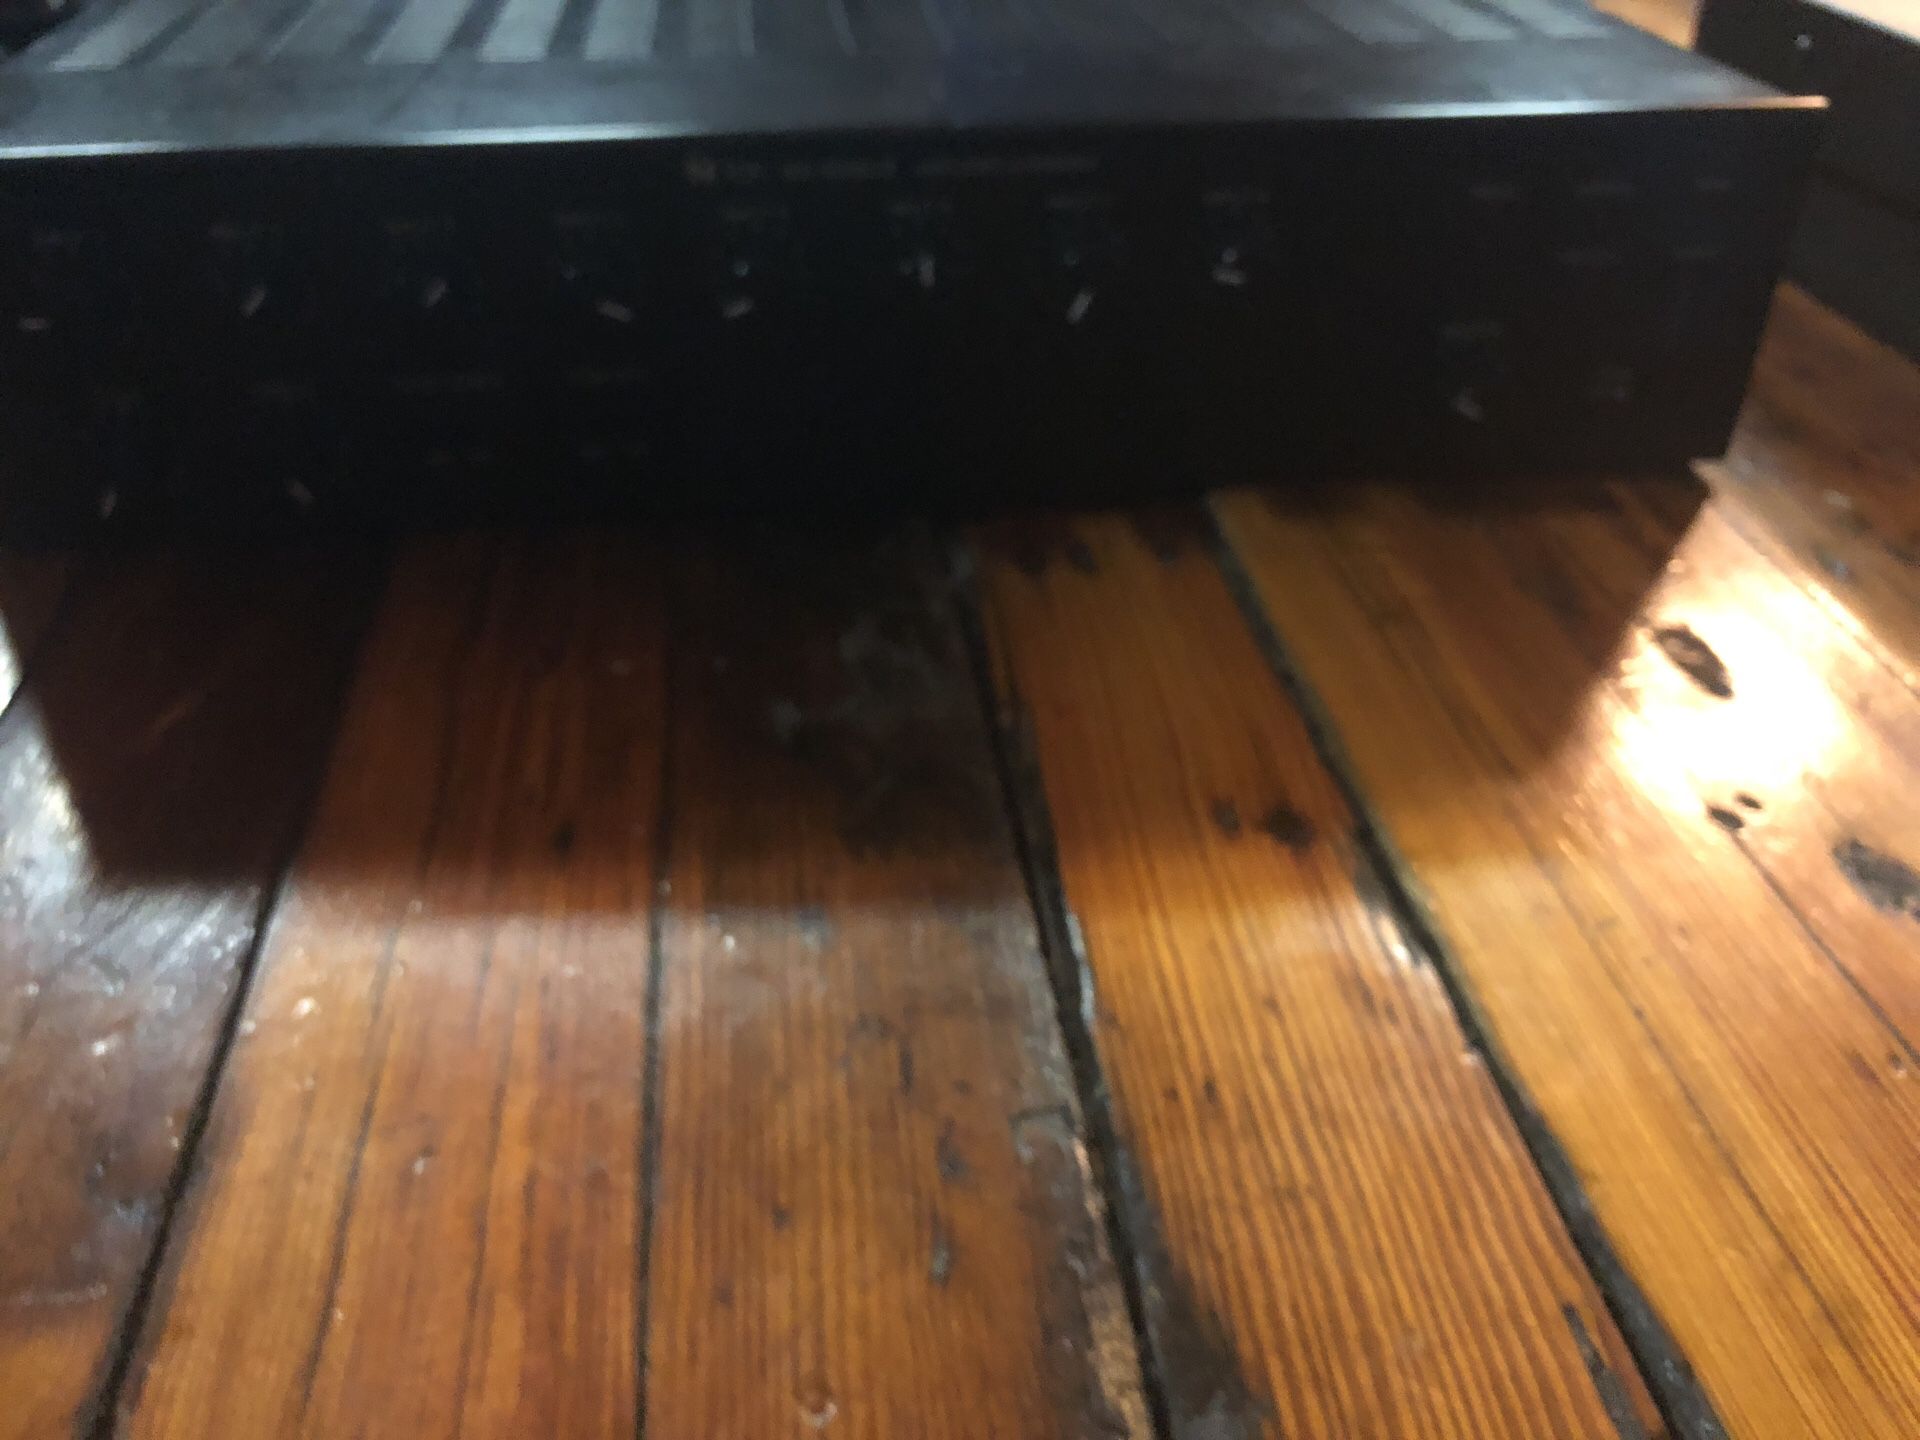 TOA 900 series amplifier A 906mk2 like new everything works